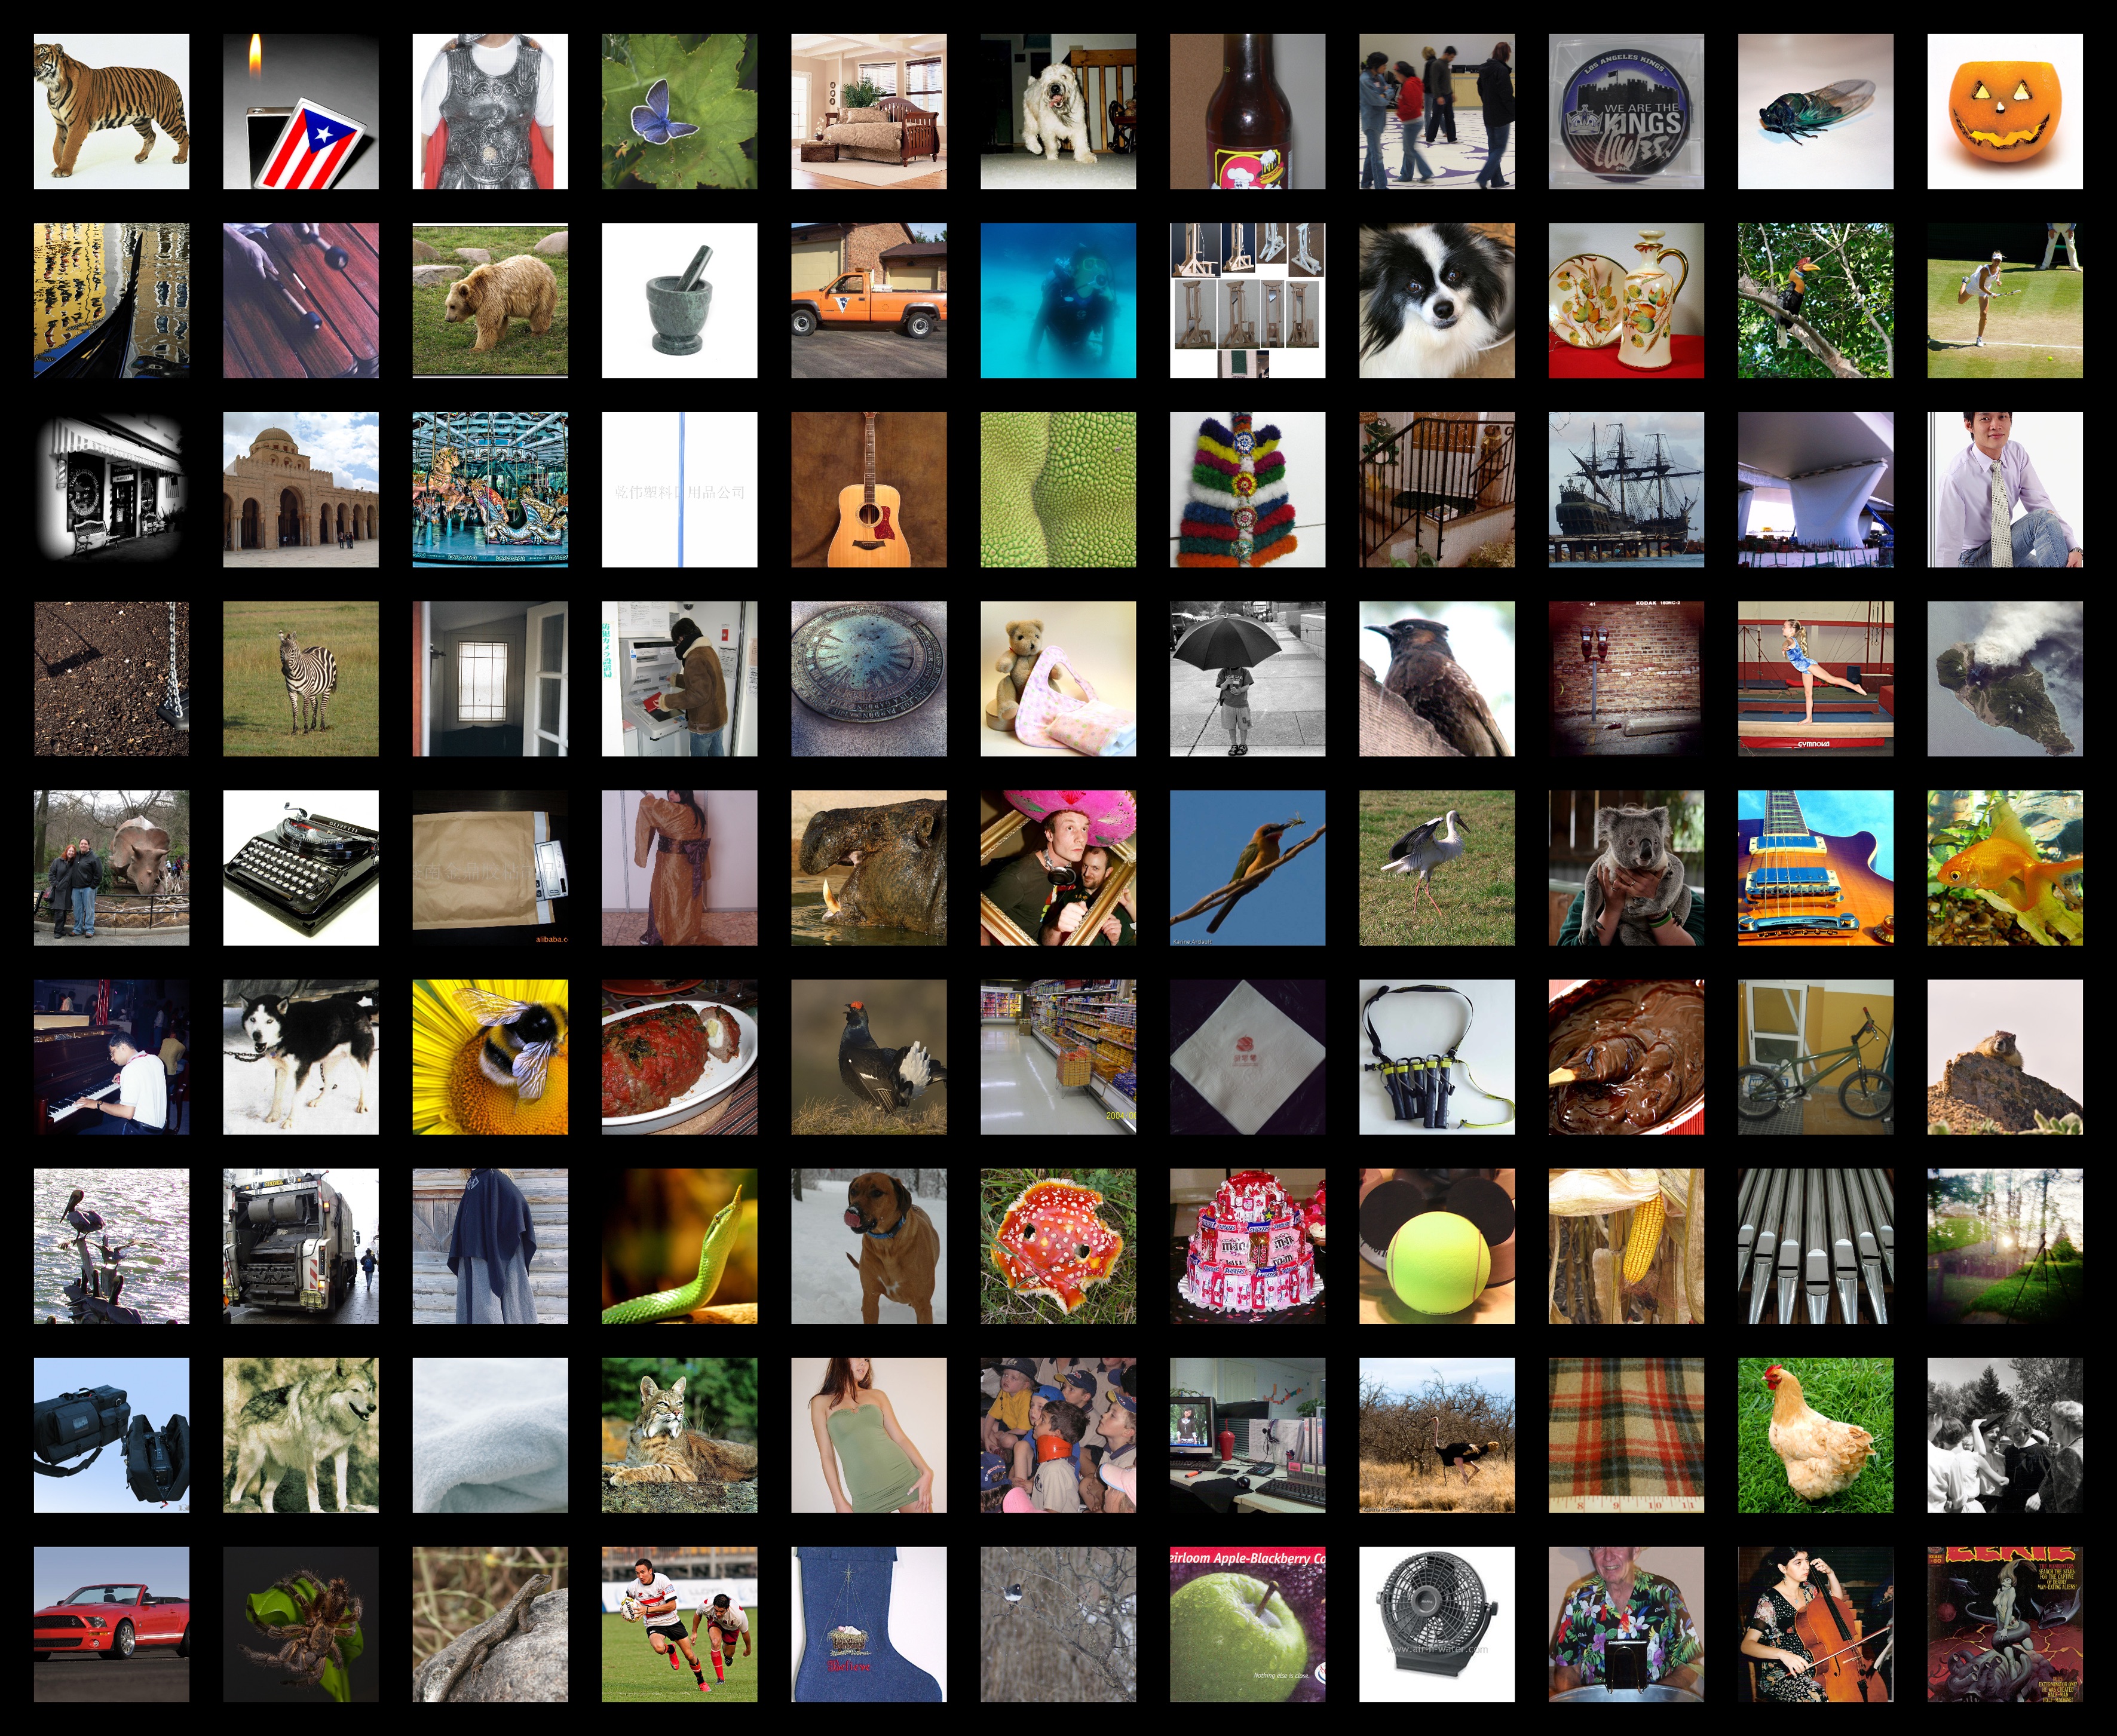 Trevor Paglen, Behold these Glorious Times! 2017. A screenshot of 55 different images used to train Artificial Intelligence. The images range from animals, people doing various things, to everyday objects. 